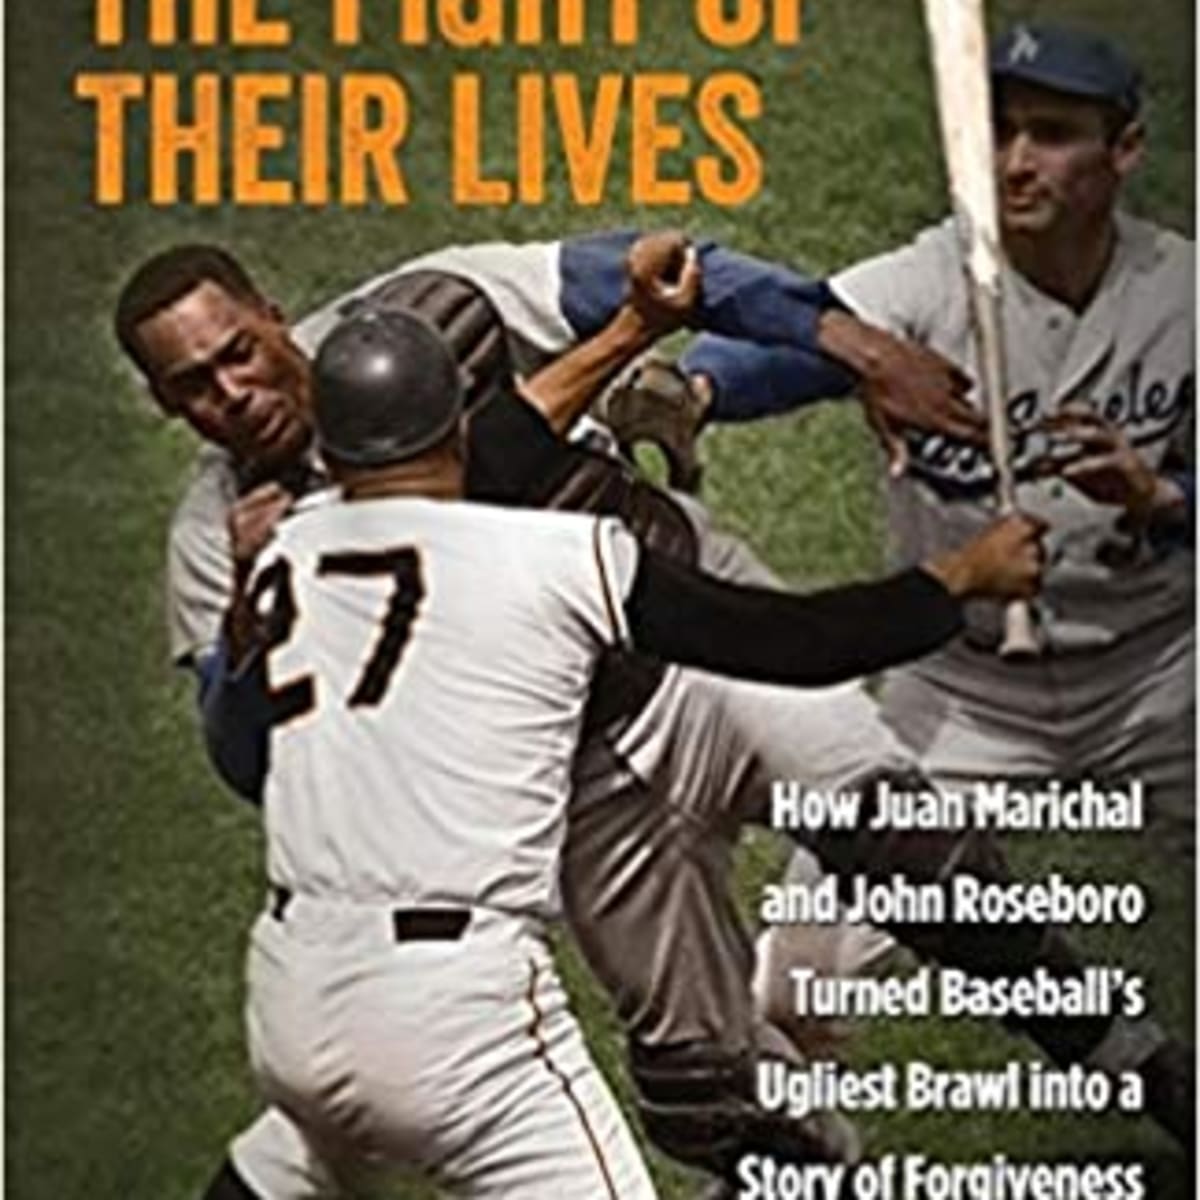 Book Excerpt: The Fight of Their Lives: How Juan Marichal and John